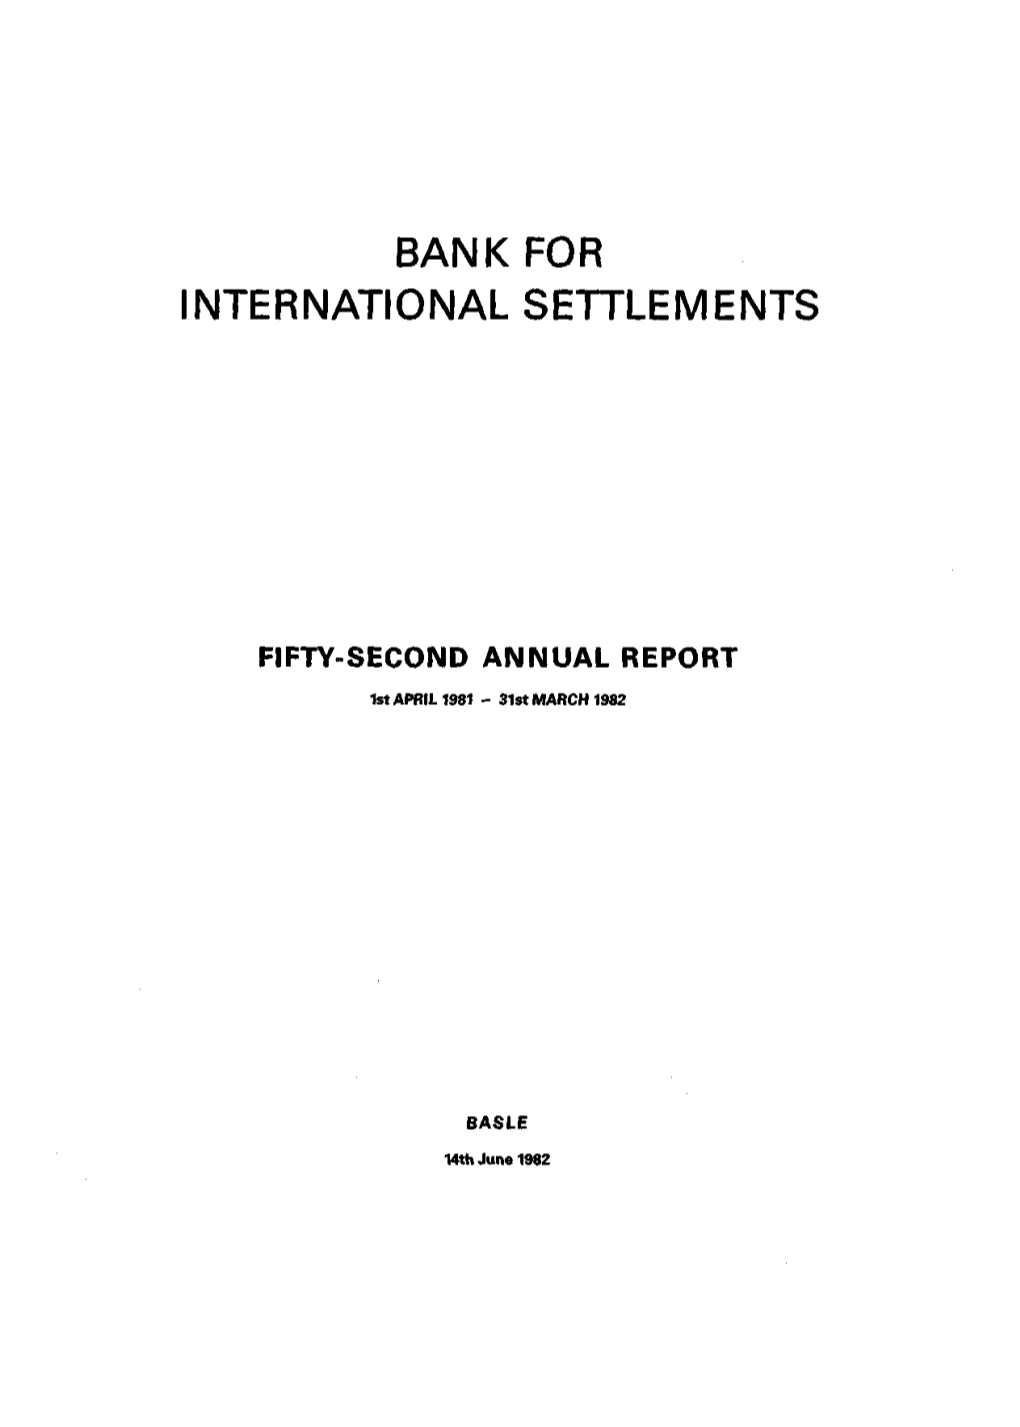 52Nd Annual Report of the Bank for International Settlements